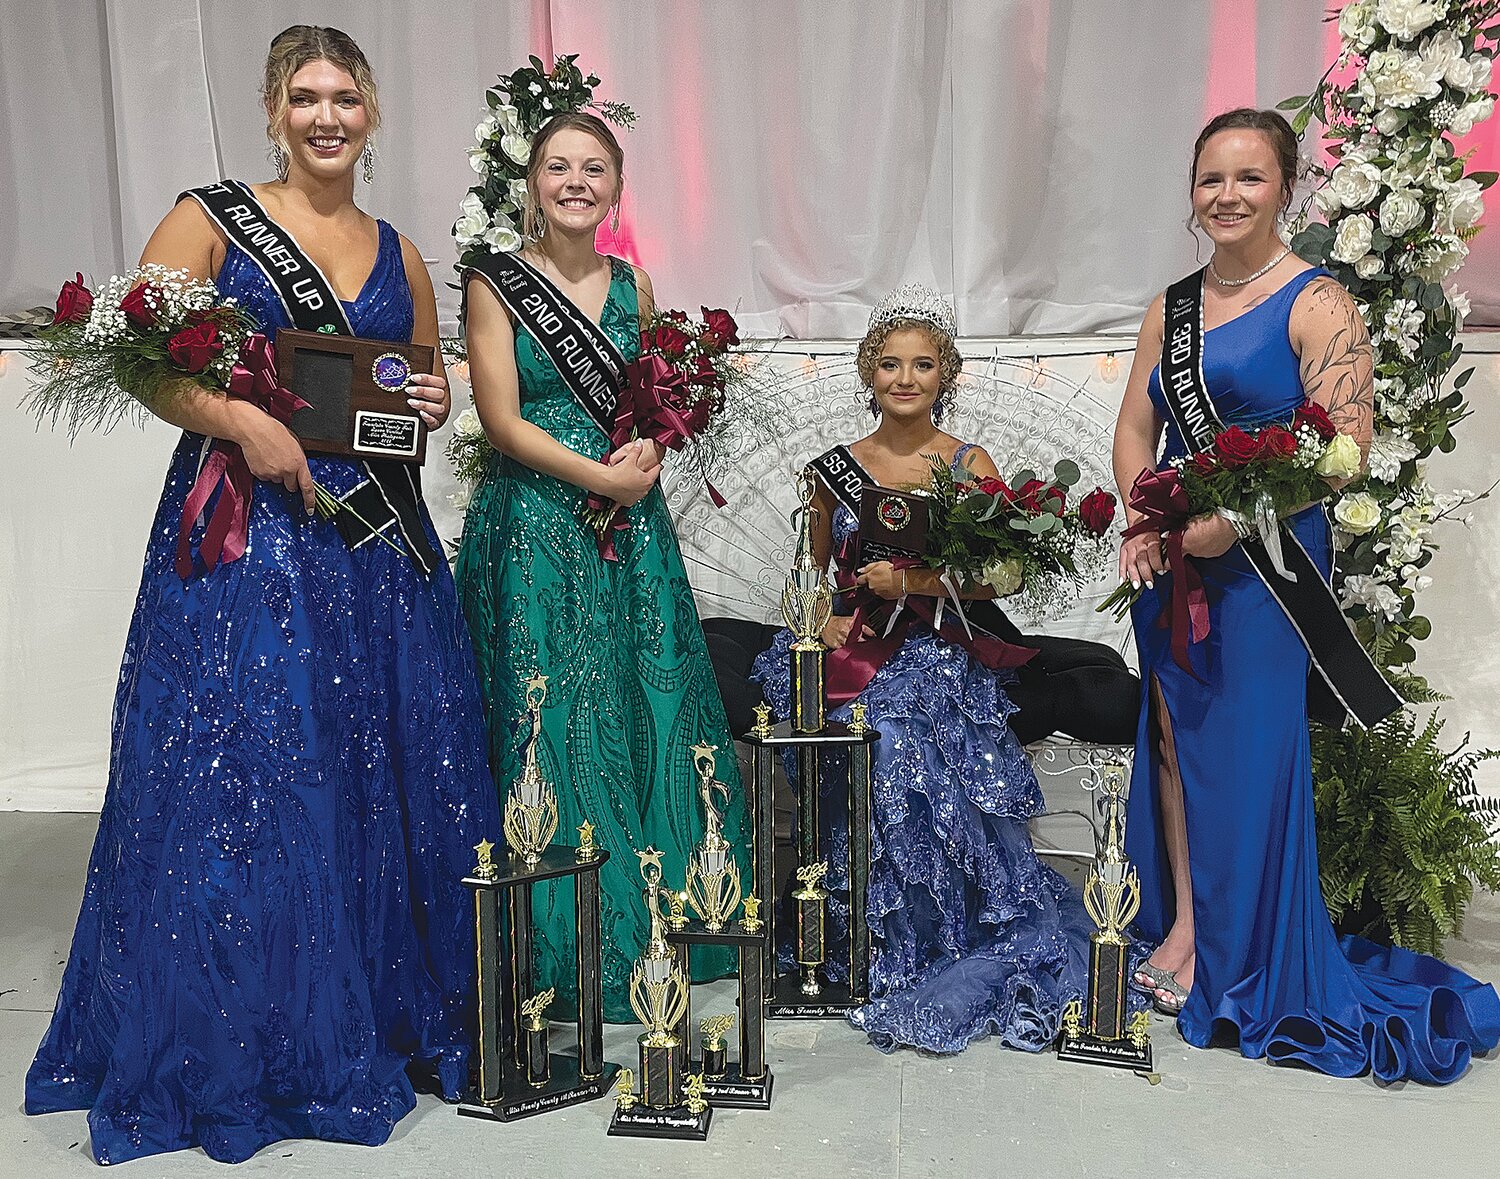 Alexis Myers (seated) was crowned Miss Fountain County 2024 on Saturday. She also earned the People’s Choice Award. Myers is pictured with member of her court, from left, Micah Stonecipher, first runner-up and winner of the photogenic award; Avery Donaldson, second runner-up and Miss Congeniality; and Ashlynn Livengood, third runner-up. The Fountain County 4-H Fair continues through Thursday at Veedersburg.